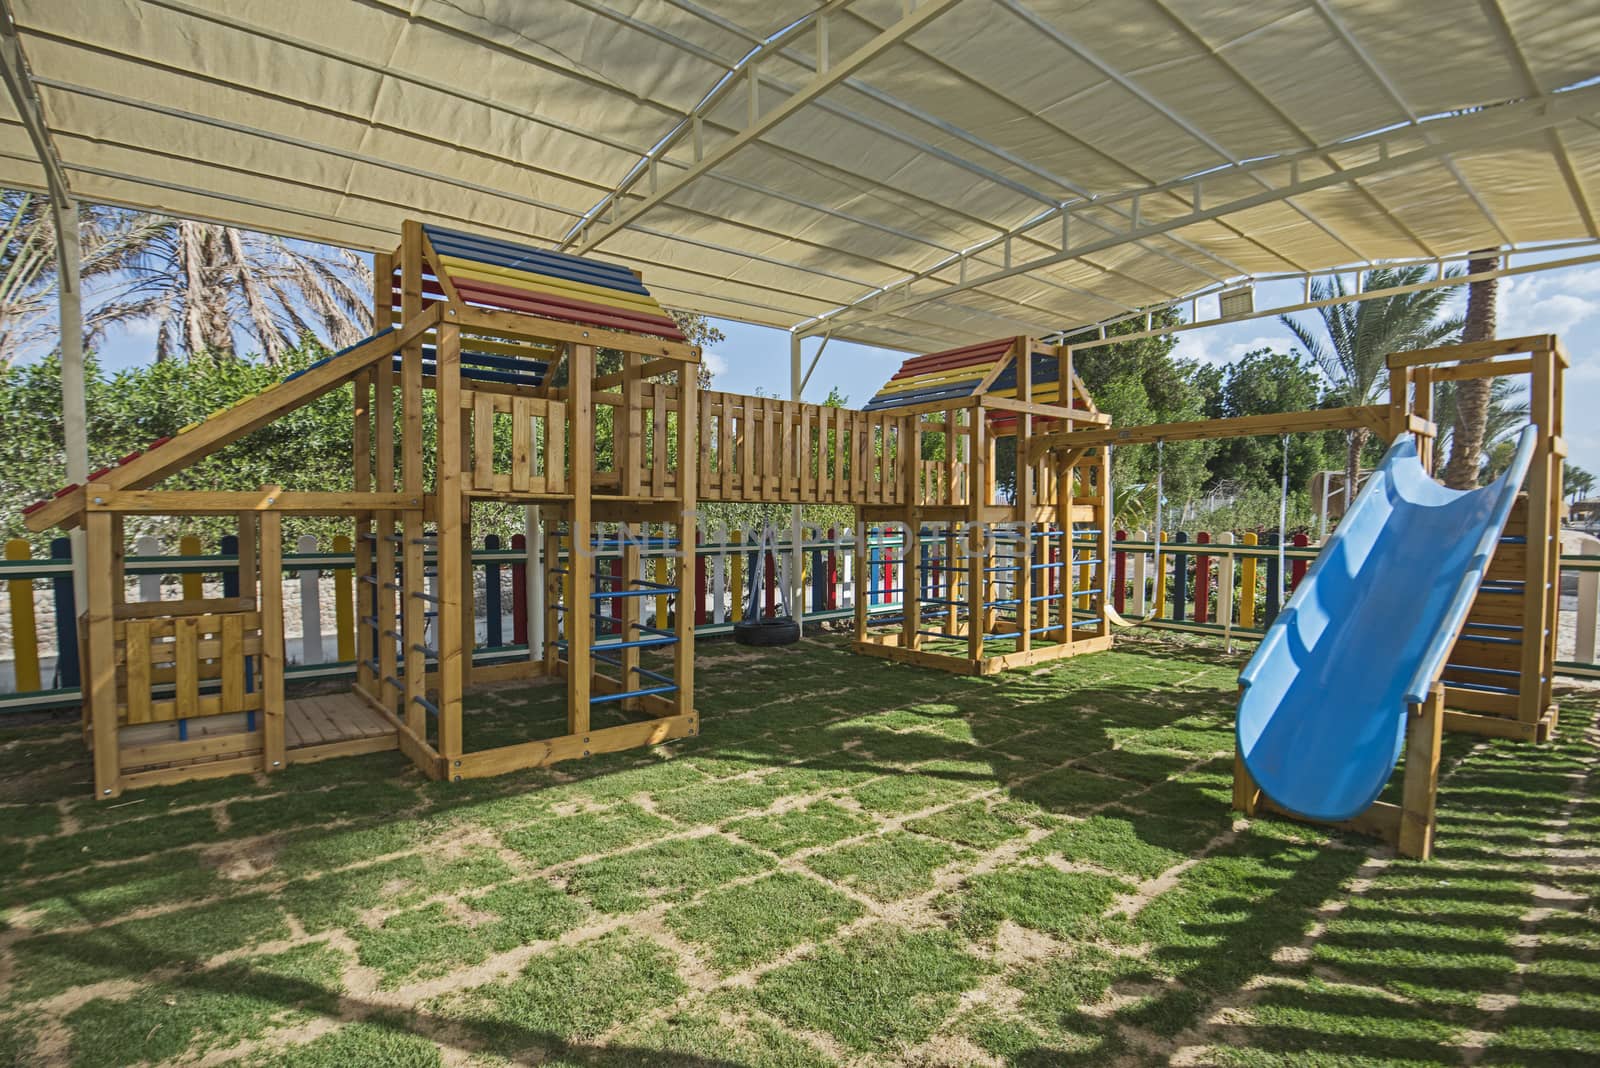 Large wooden climbing frame structure in children's playground area of luxury hotel